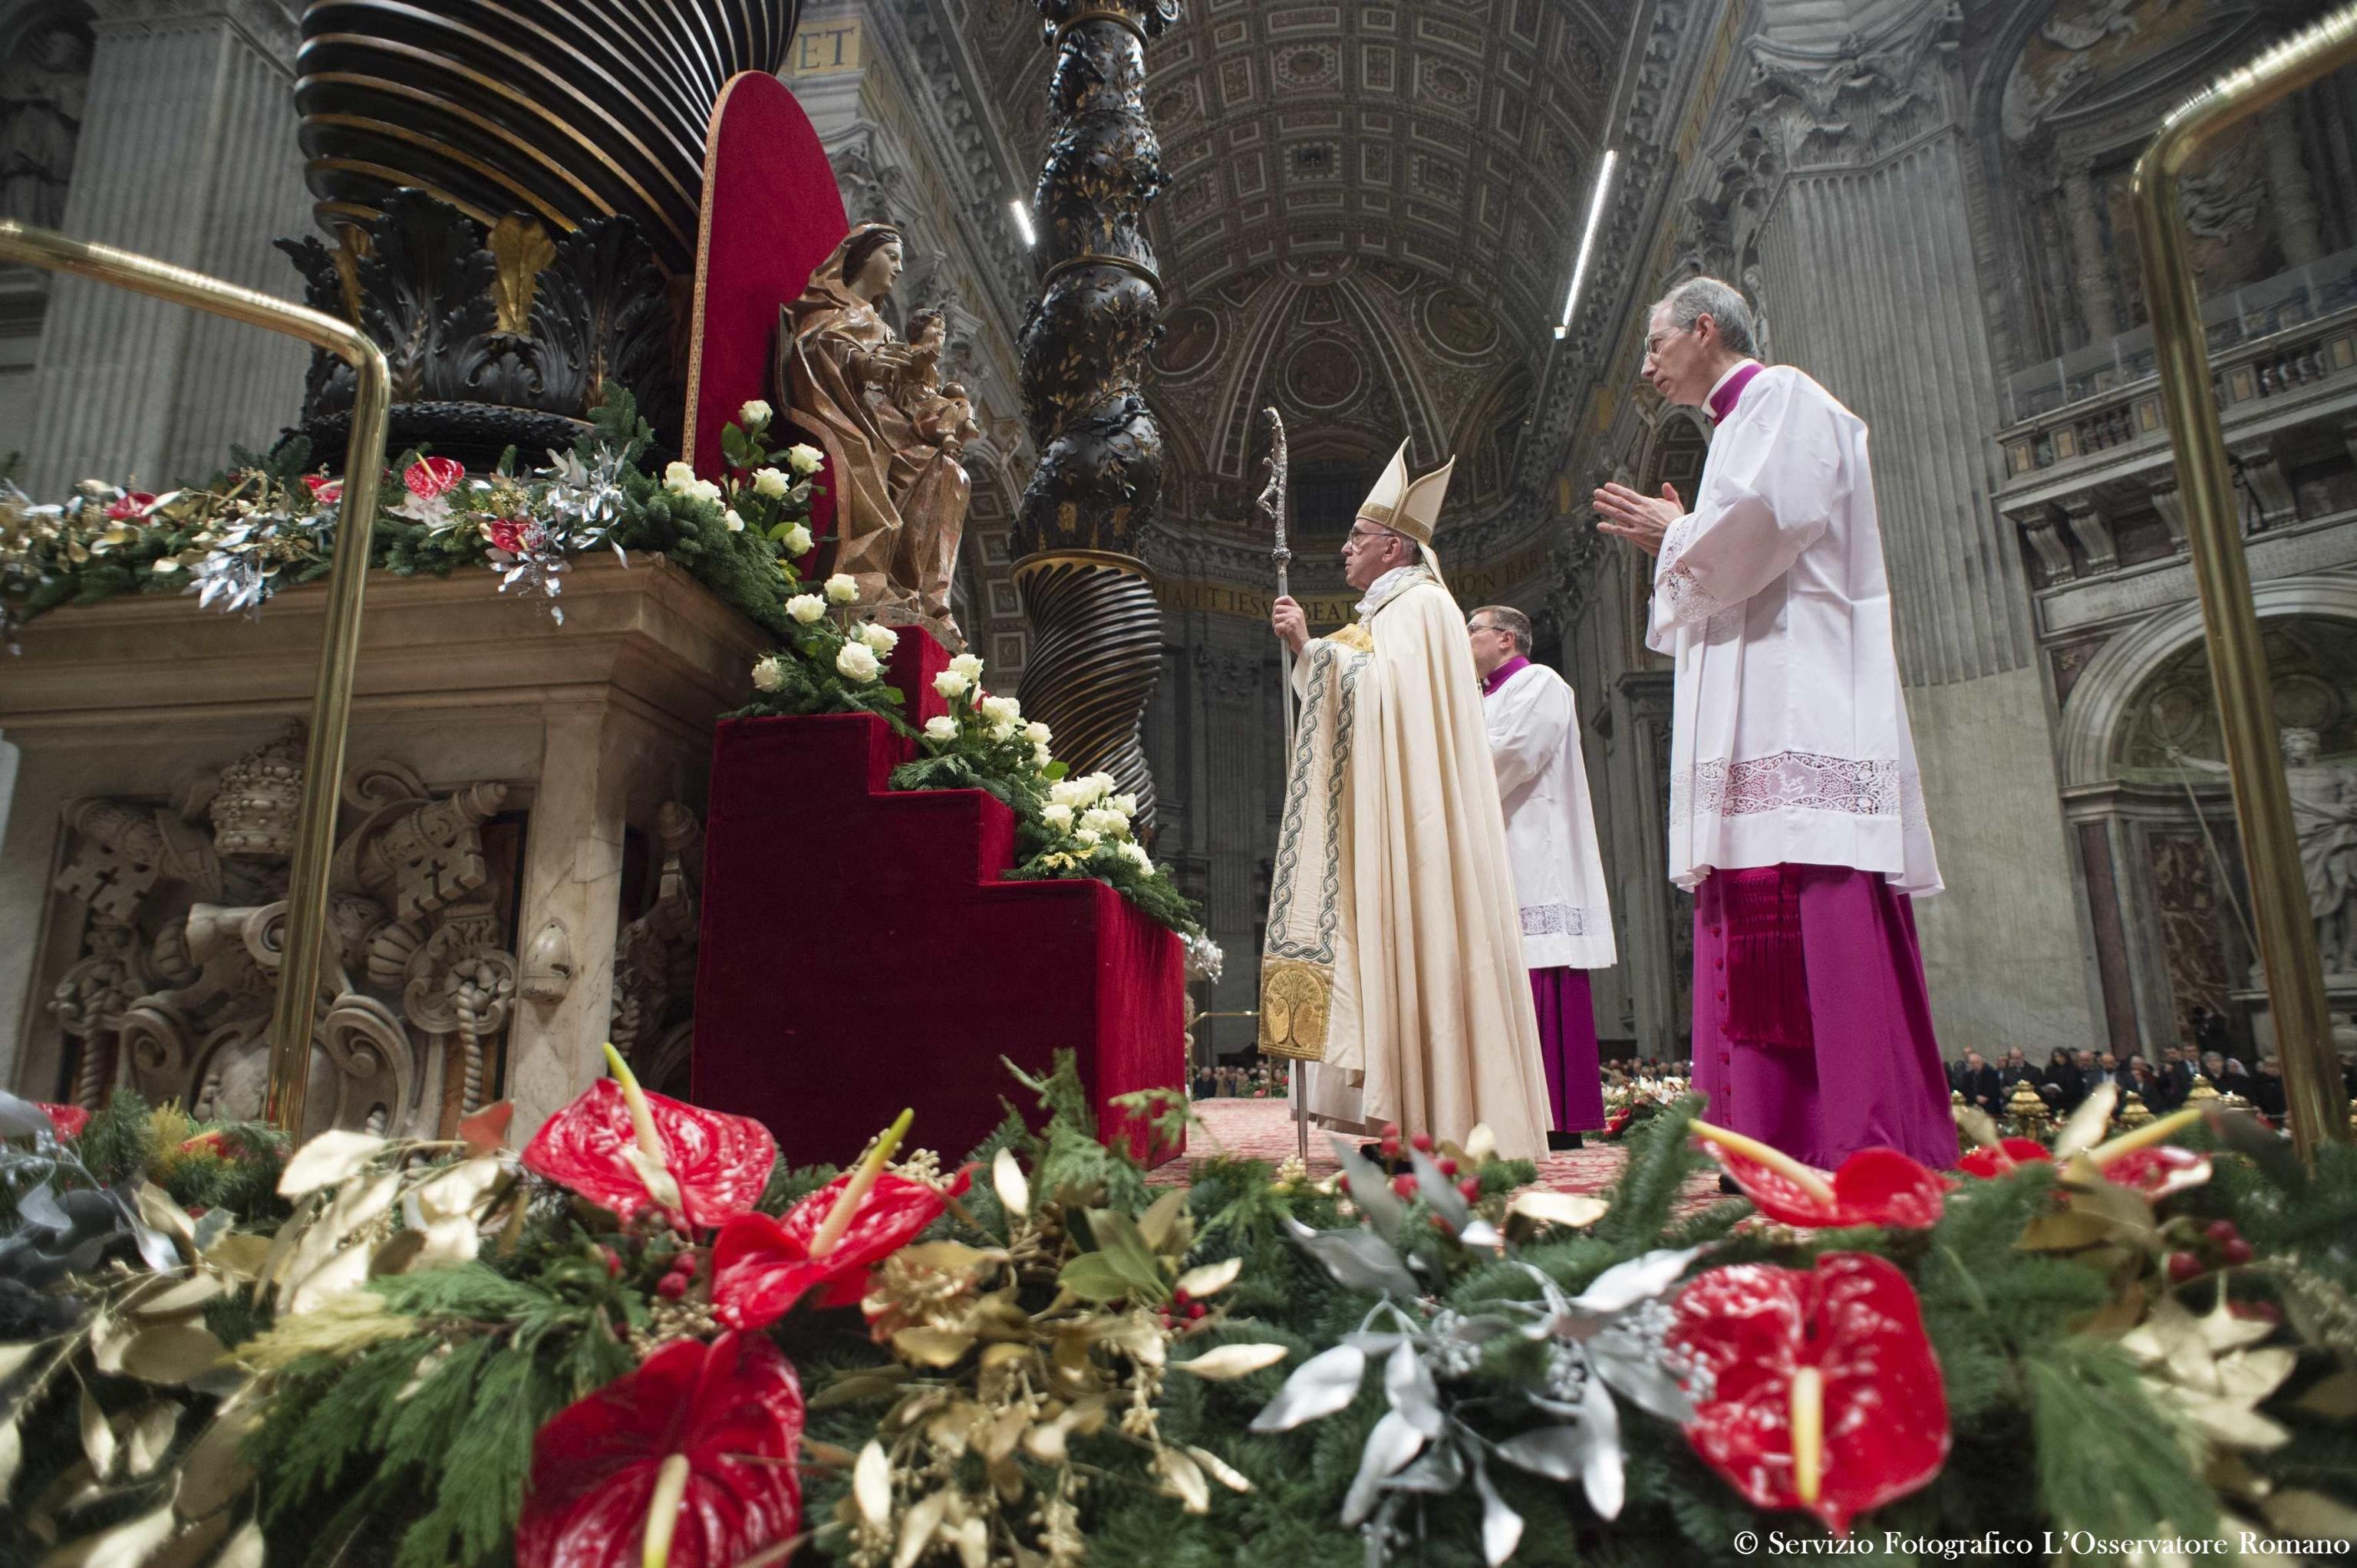 Pope Francis celebrates First Vespers and Te Deum in Saint Peter's Basilica